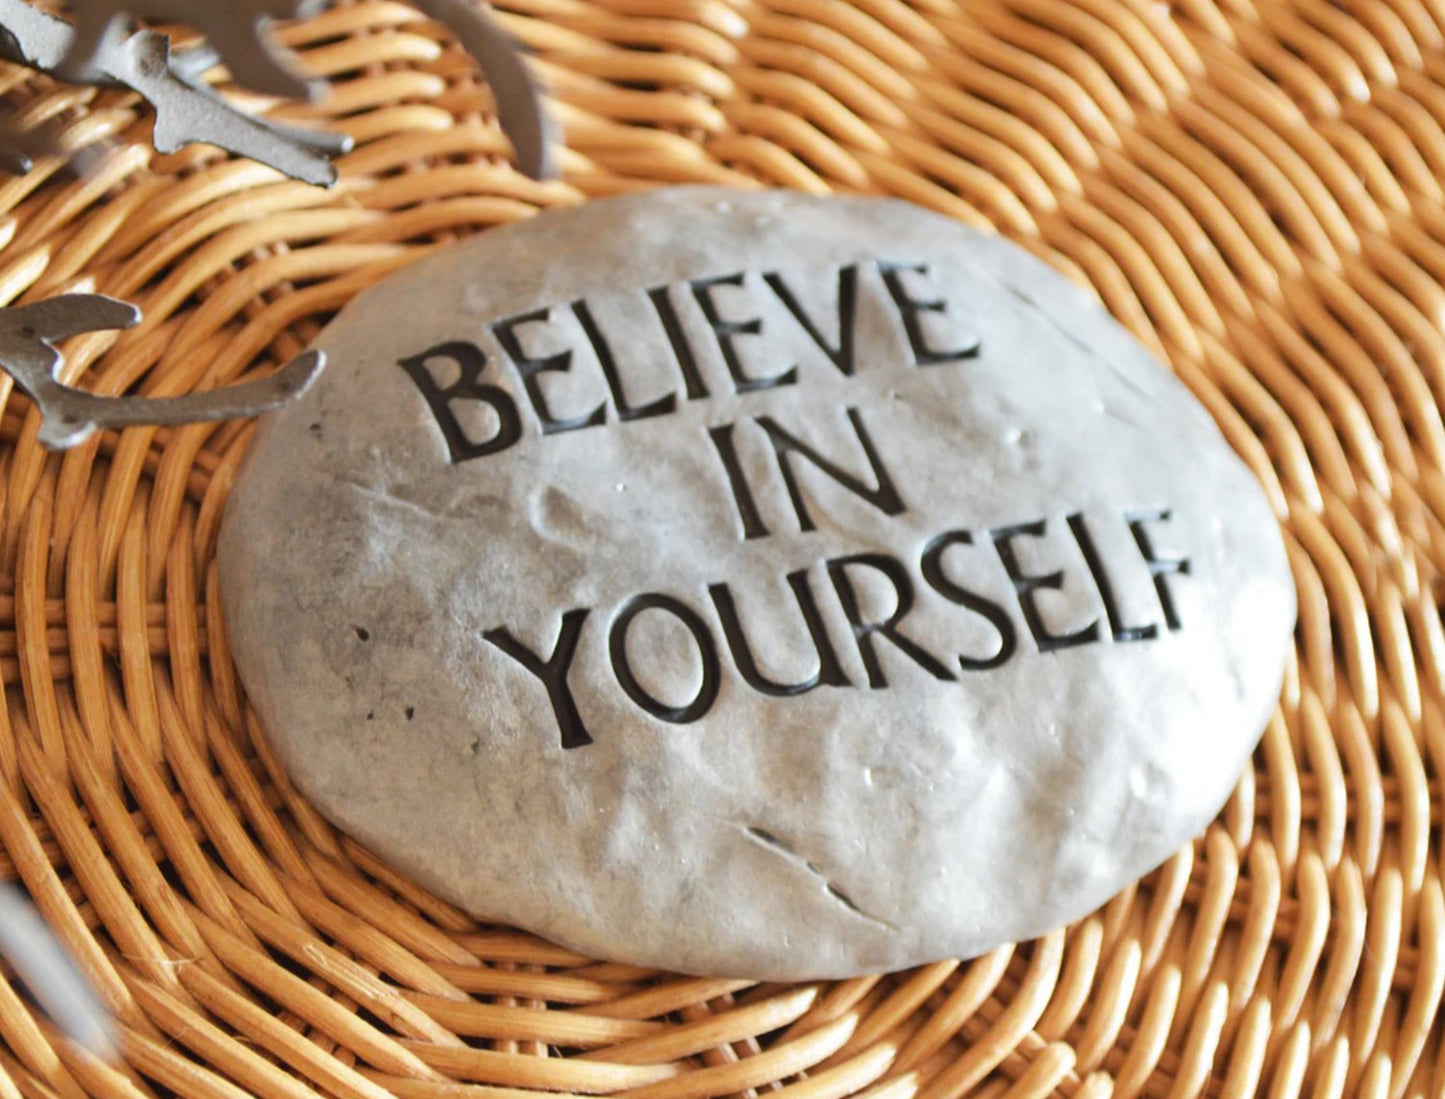 BELIEVE IN YOURSELF Stone - gift for grads